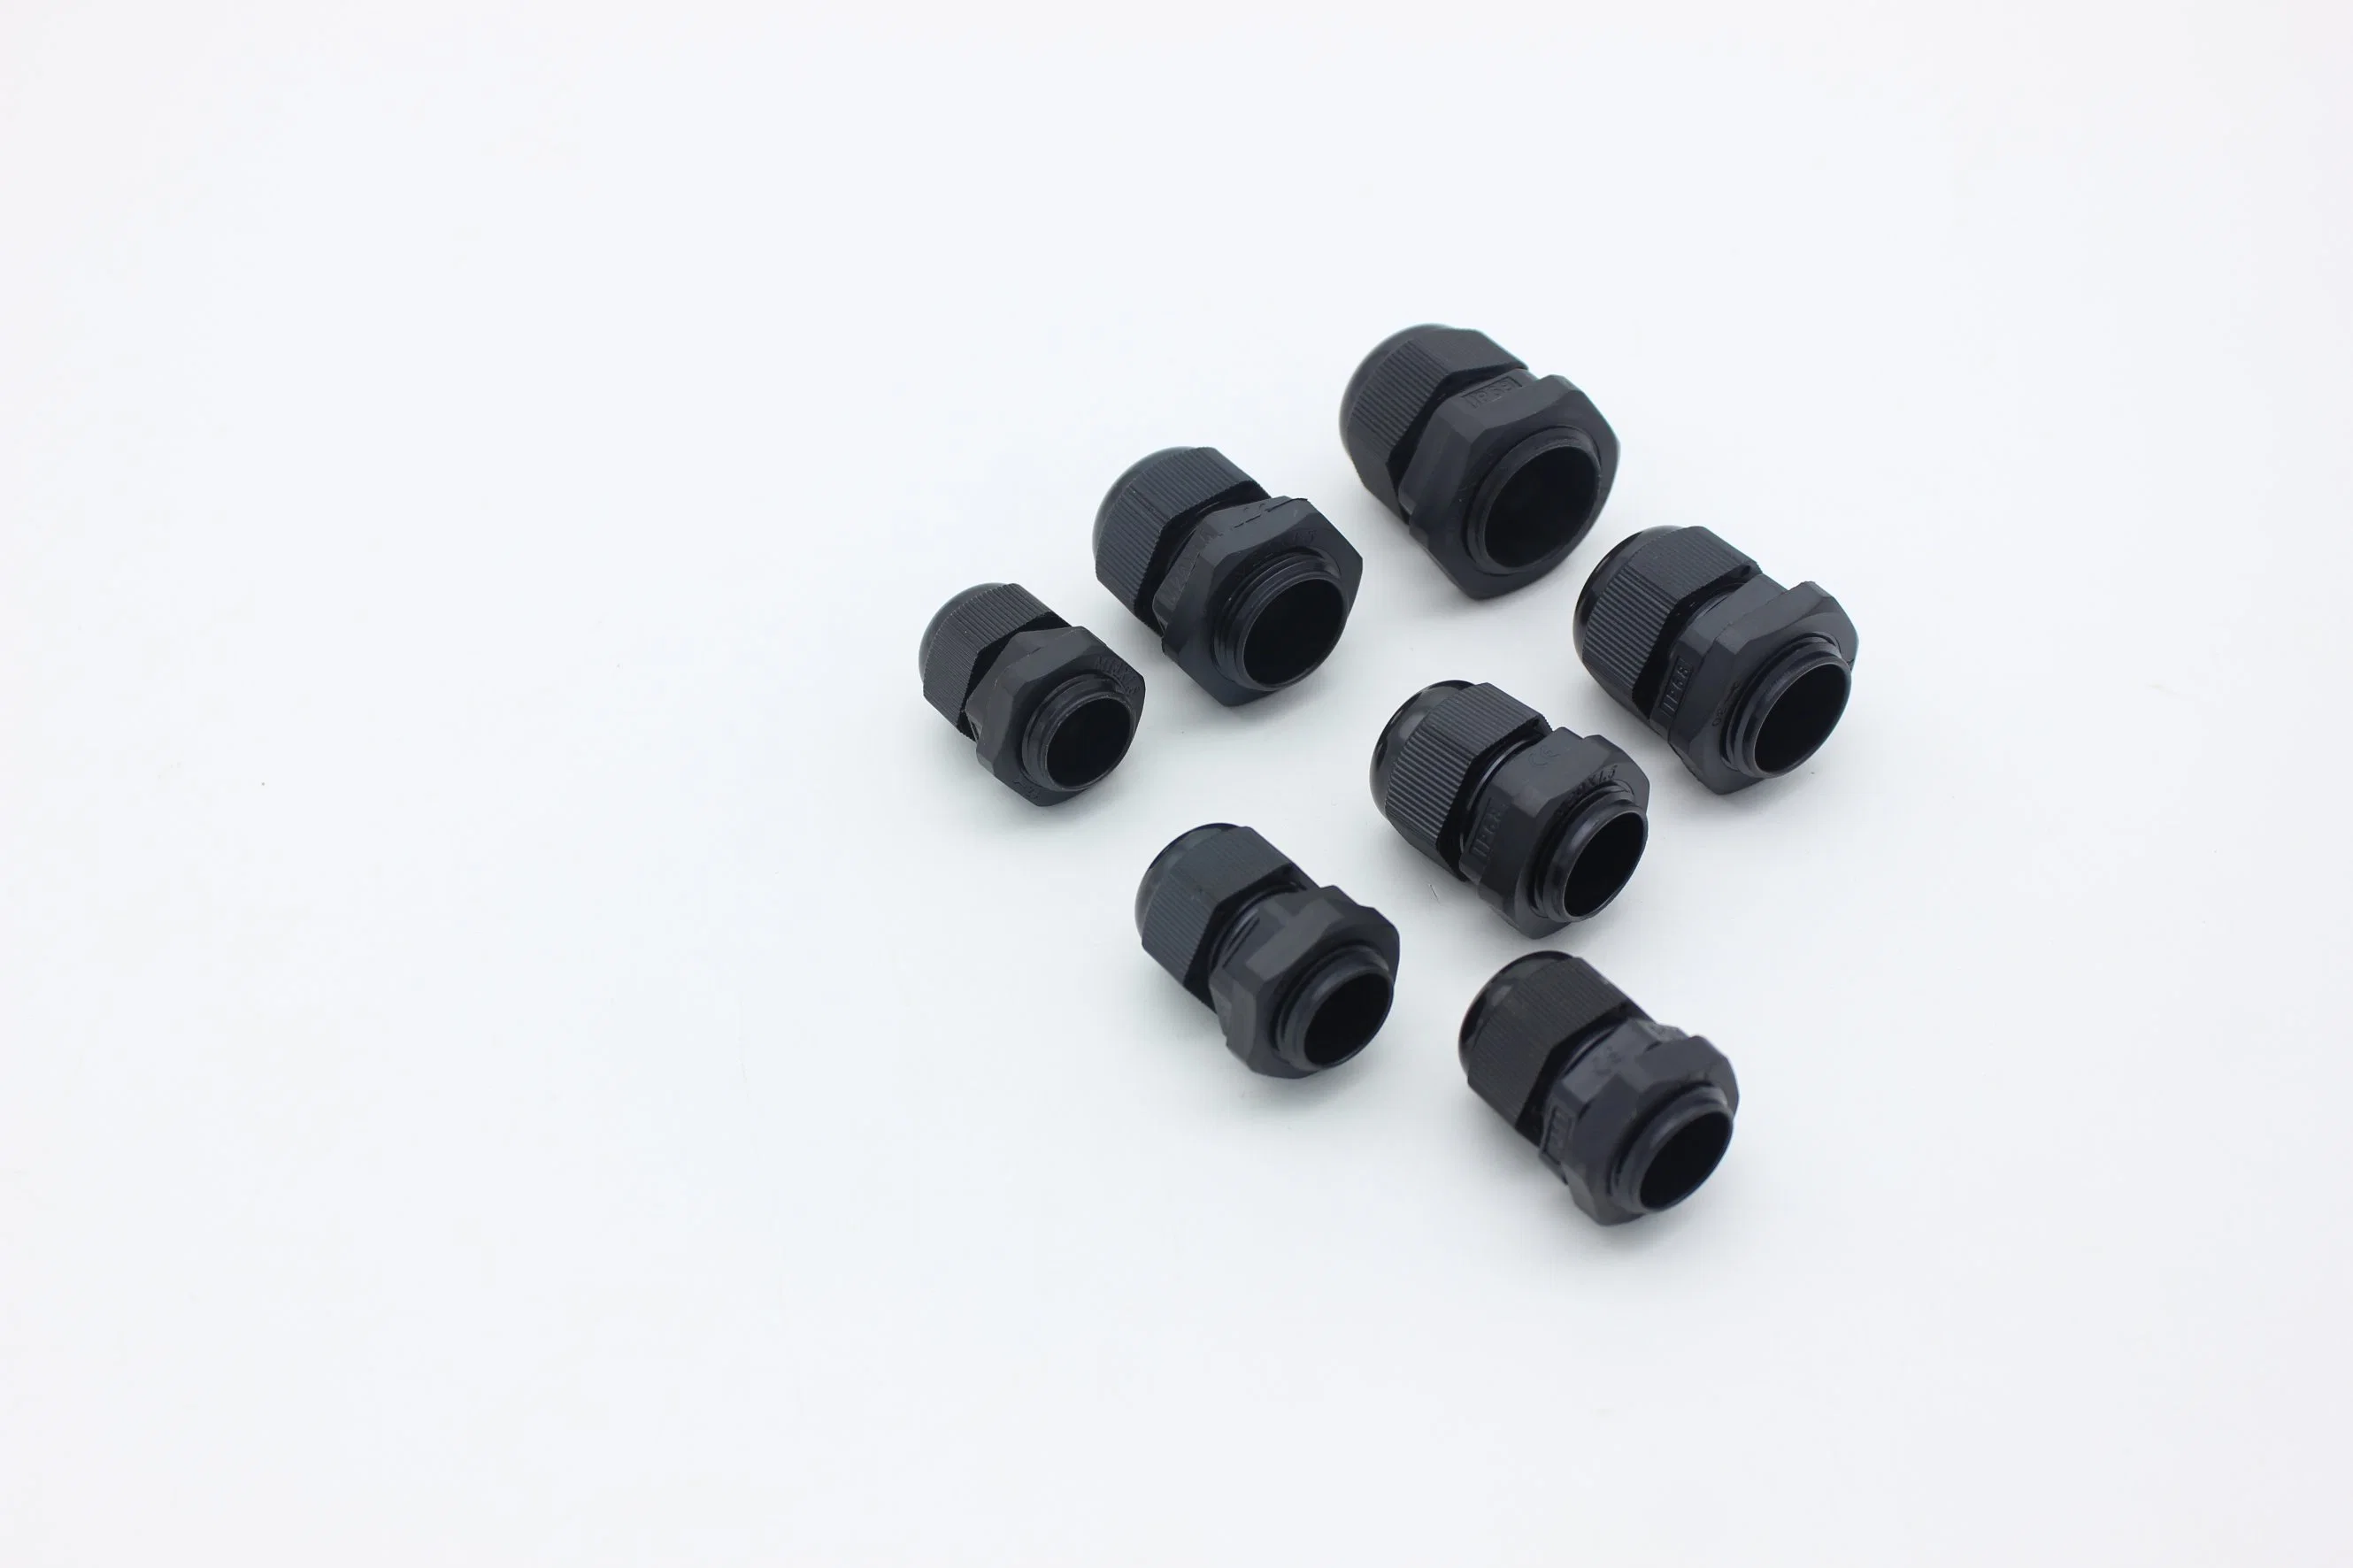 Nylon Electrical Cable Gland Connector Sizes Thread M20 Waterproof Plastic Accessories